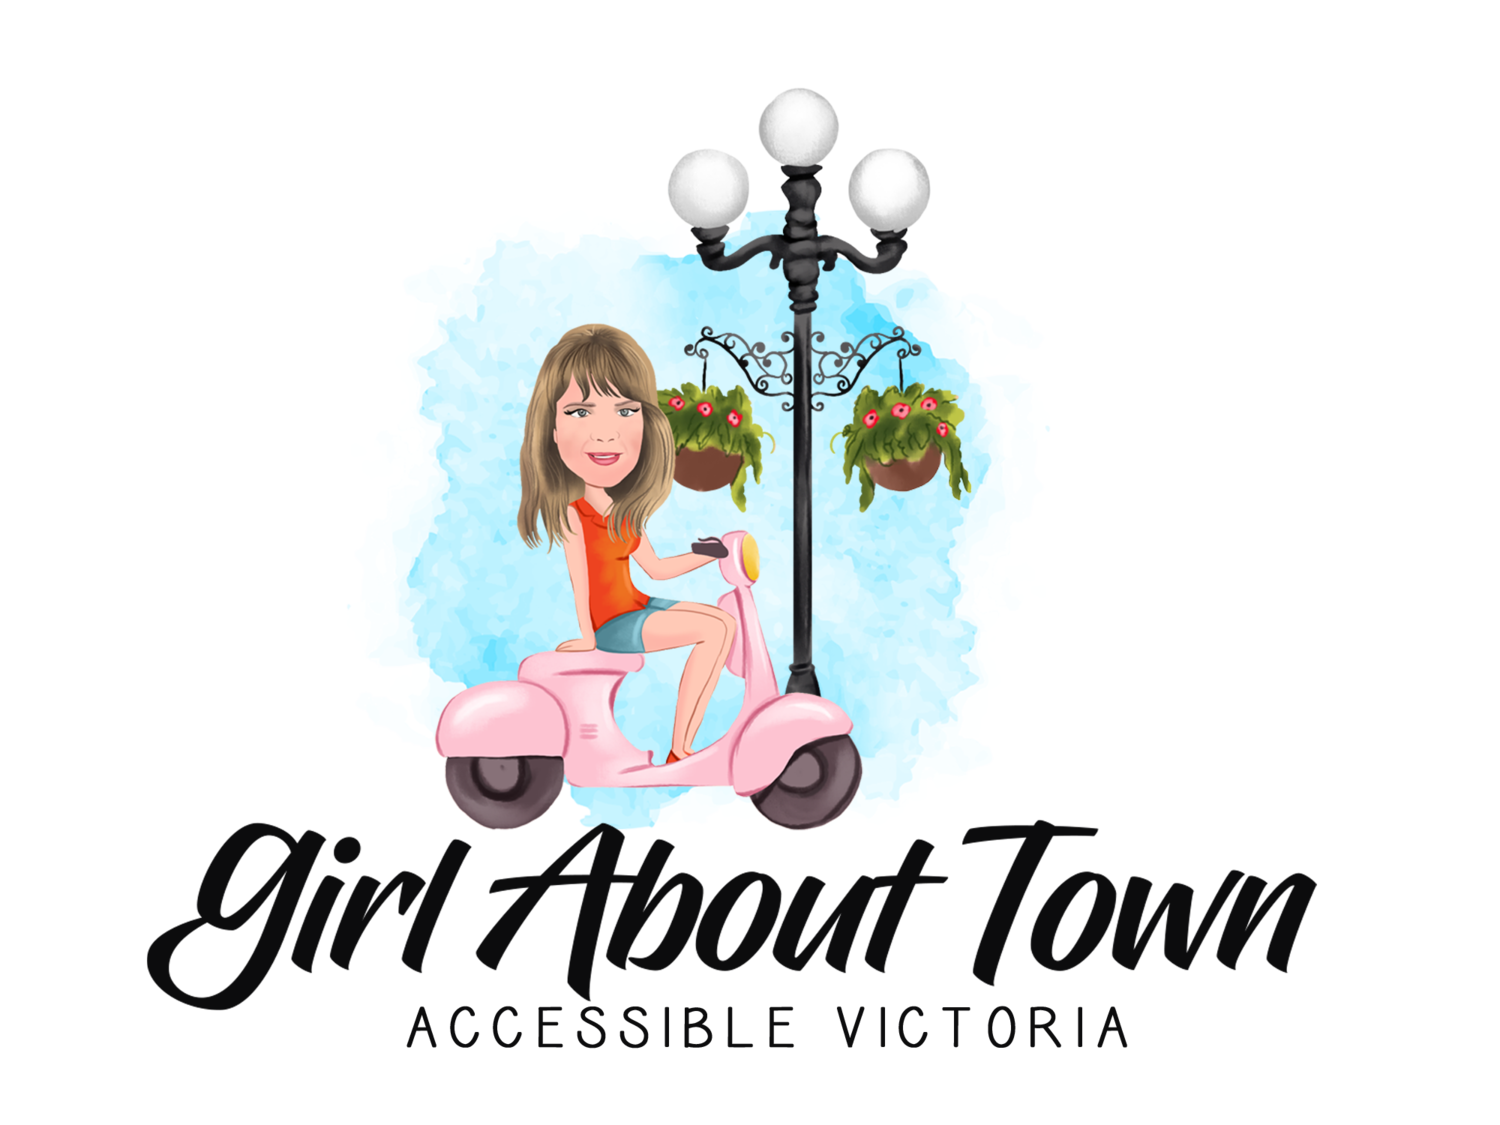 Girl About Town: Accessible Victoria